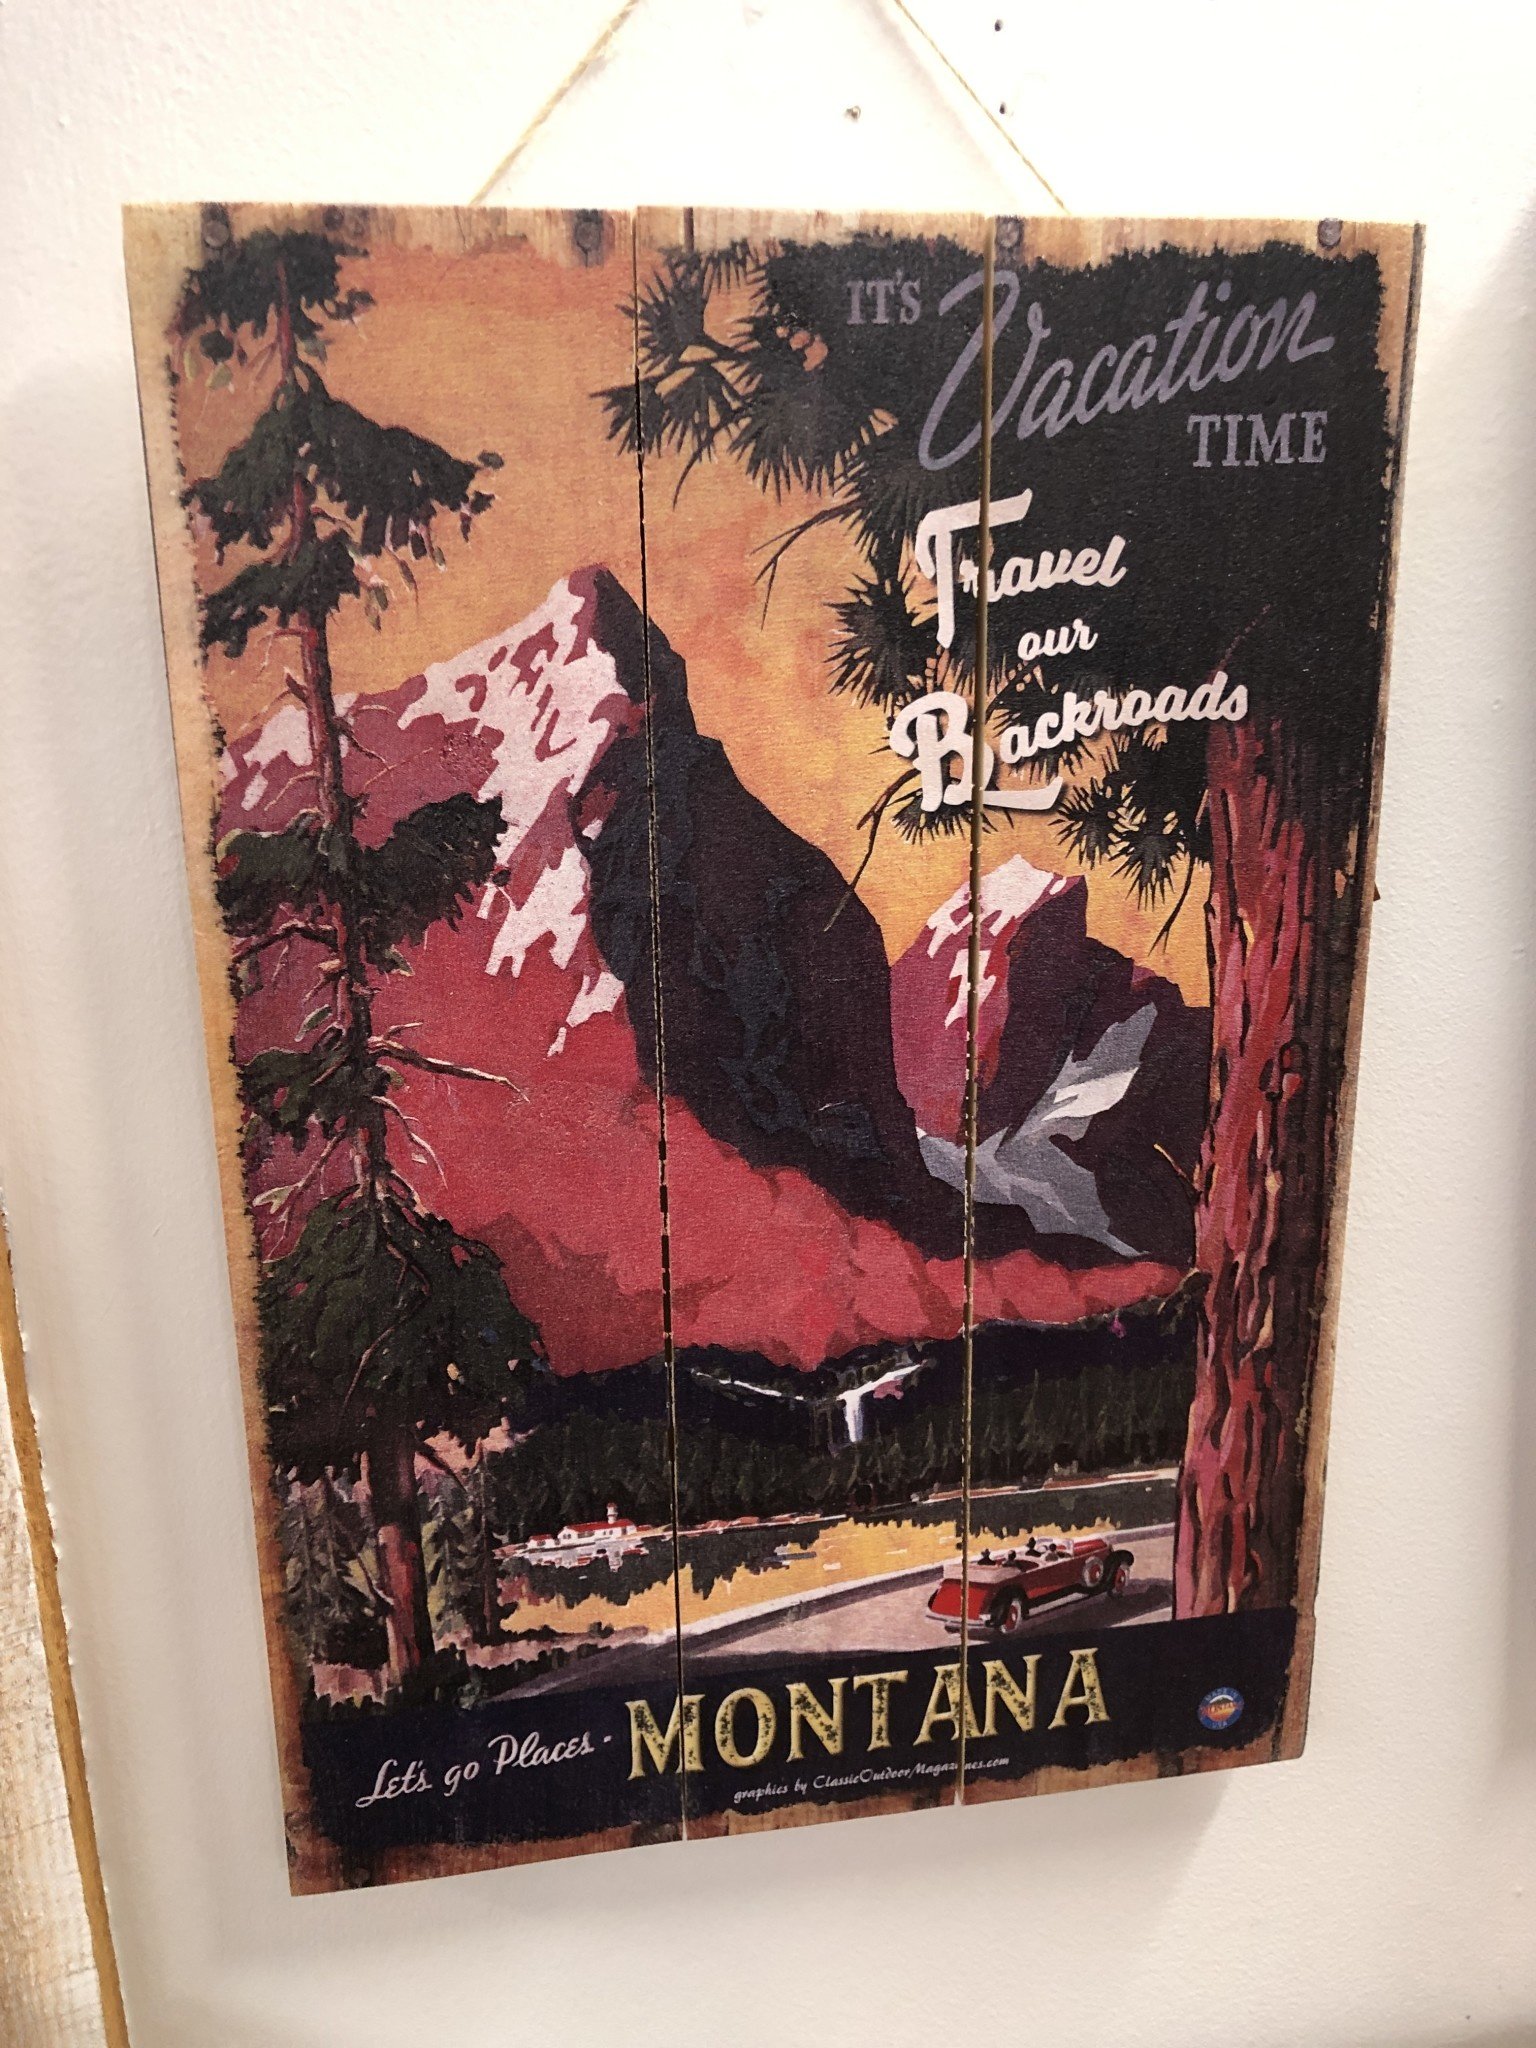 Classic Outdoor Magazines #22 Vacation Time 14x20 Wood Sign